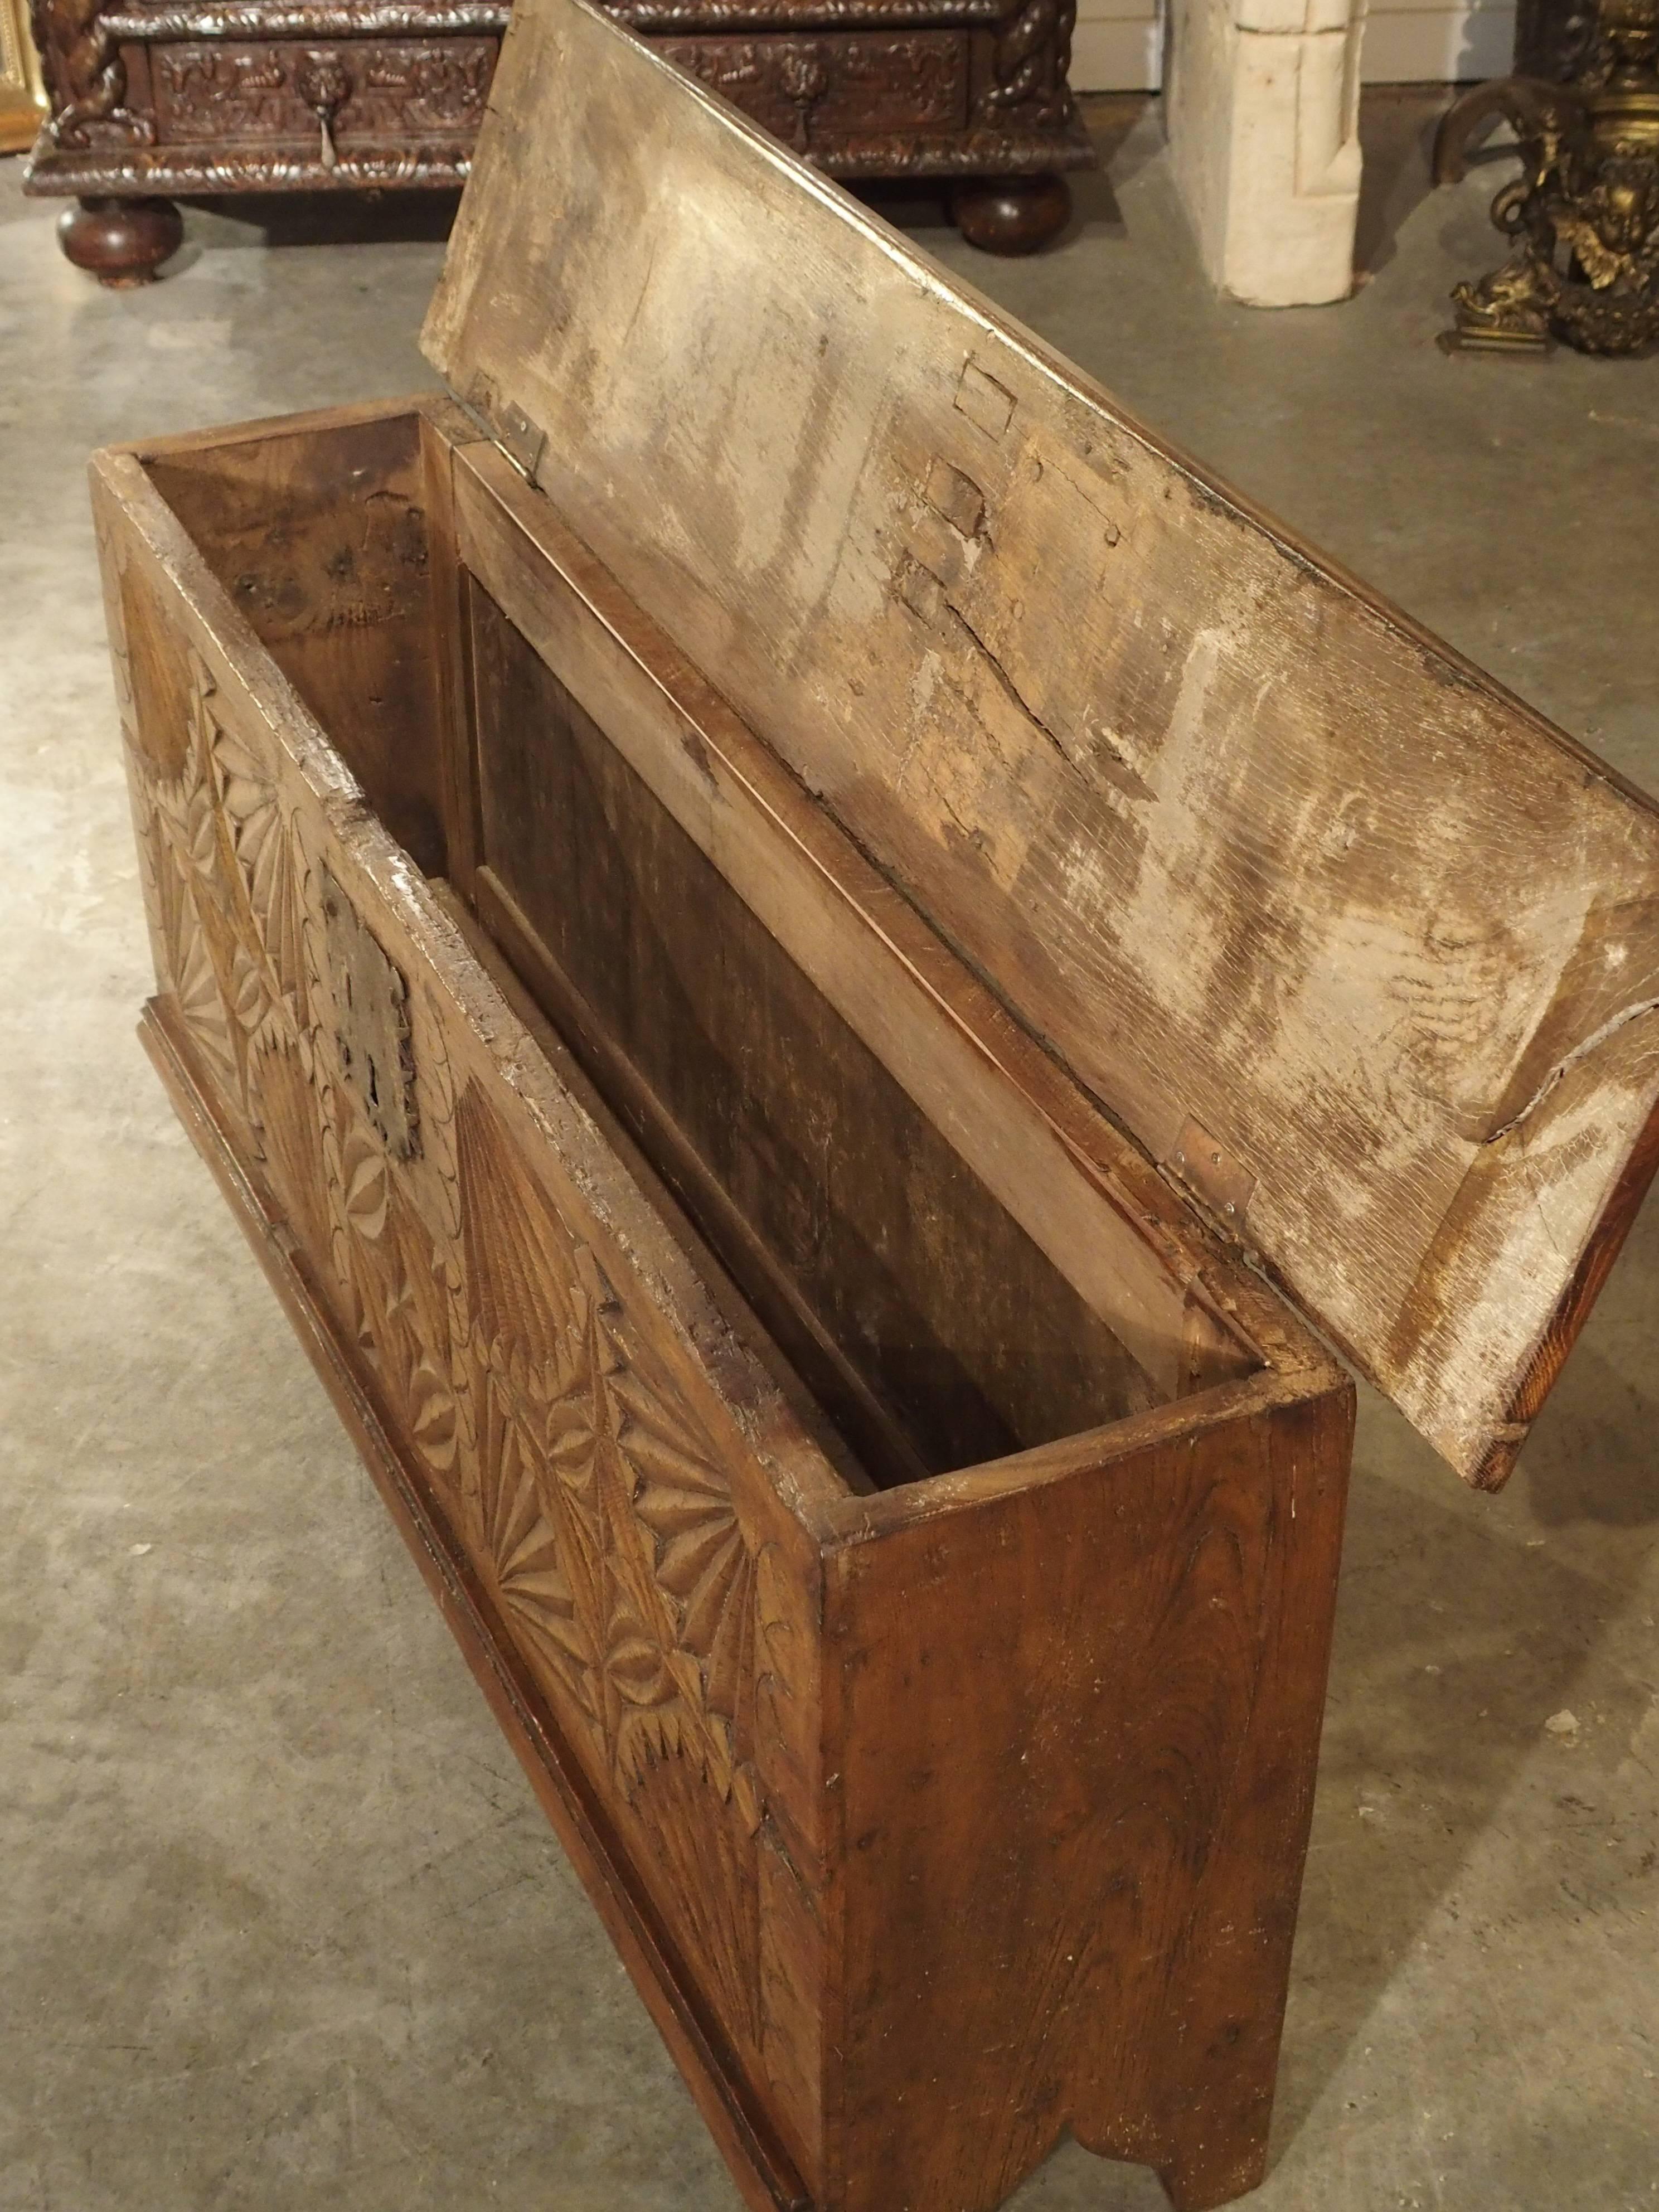 French Provincial Oak Trunk from France with Detailed Hand-Carved Front Panel